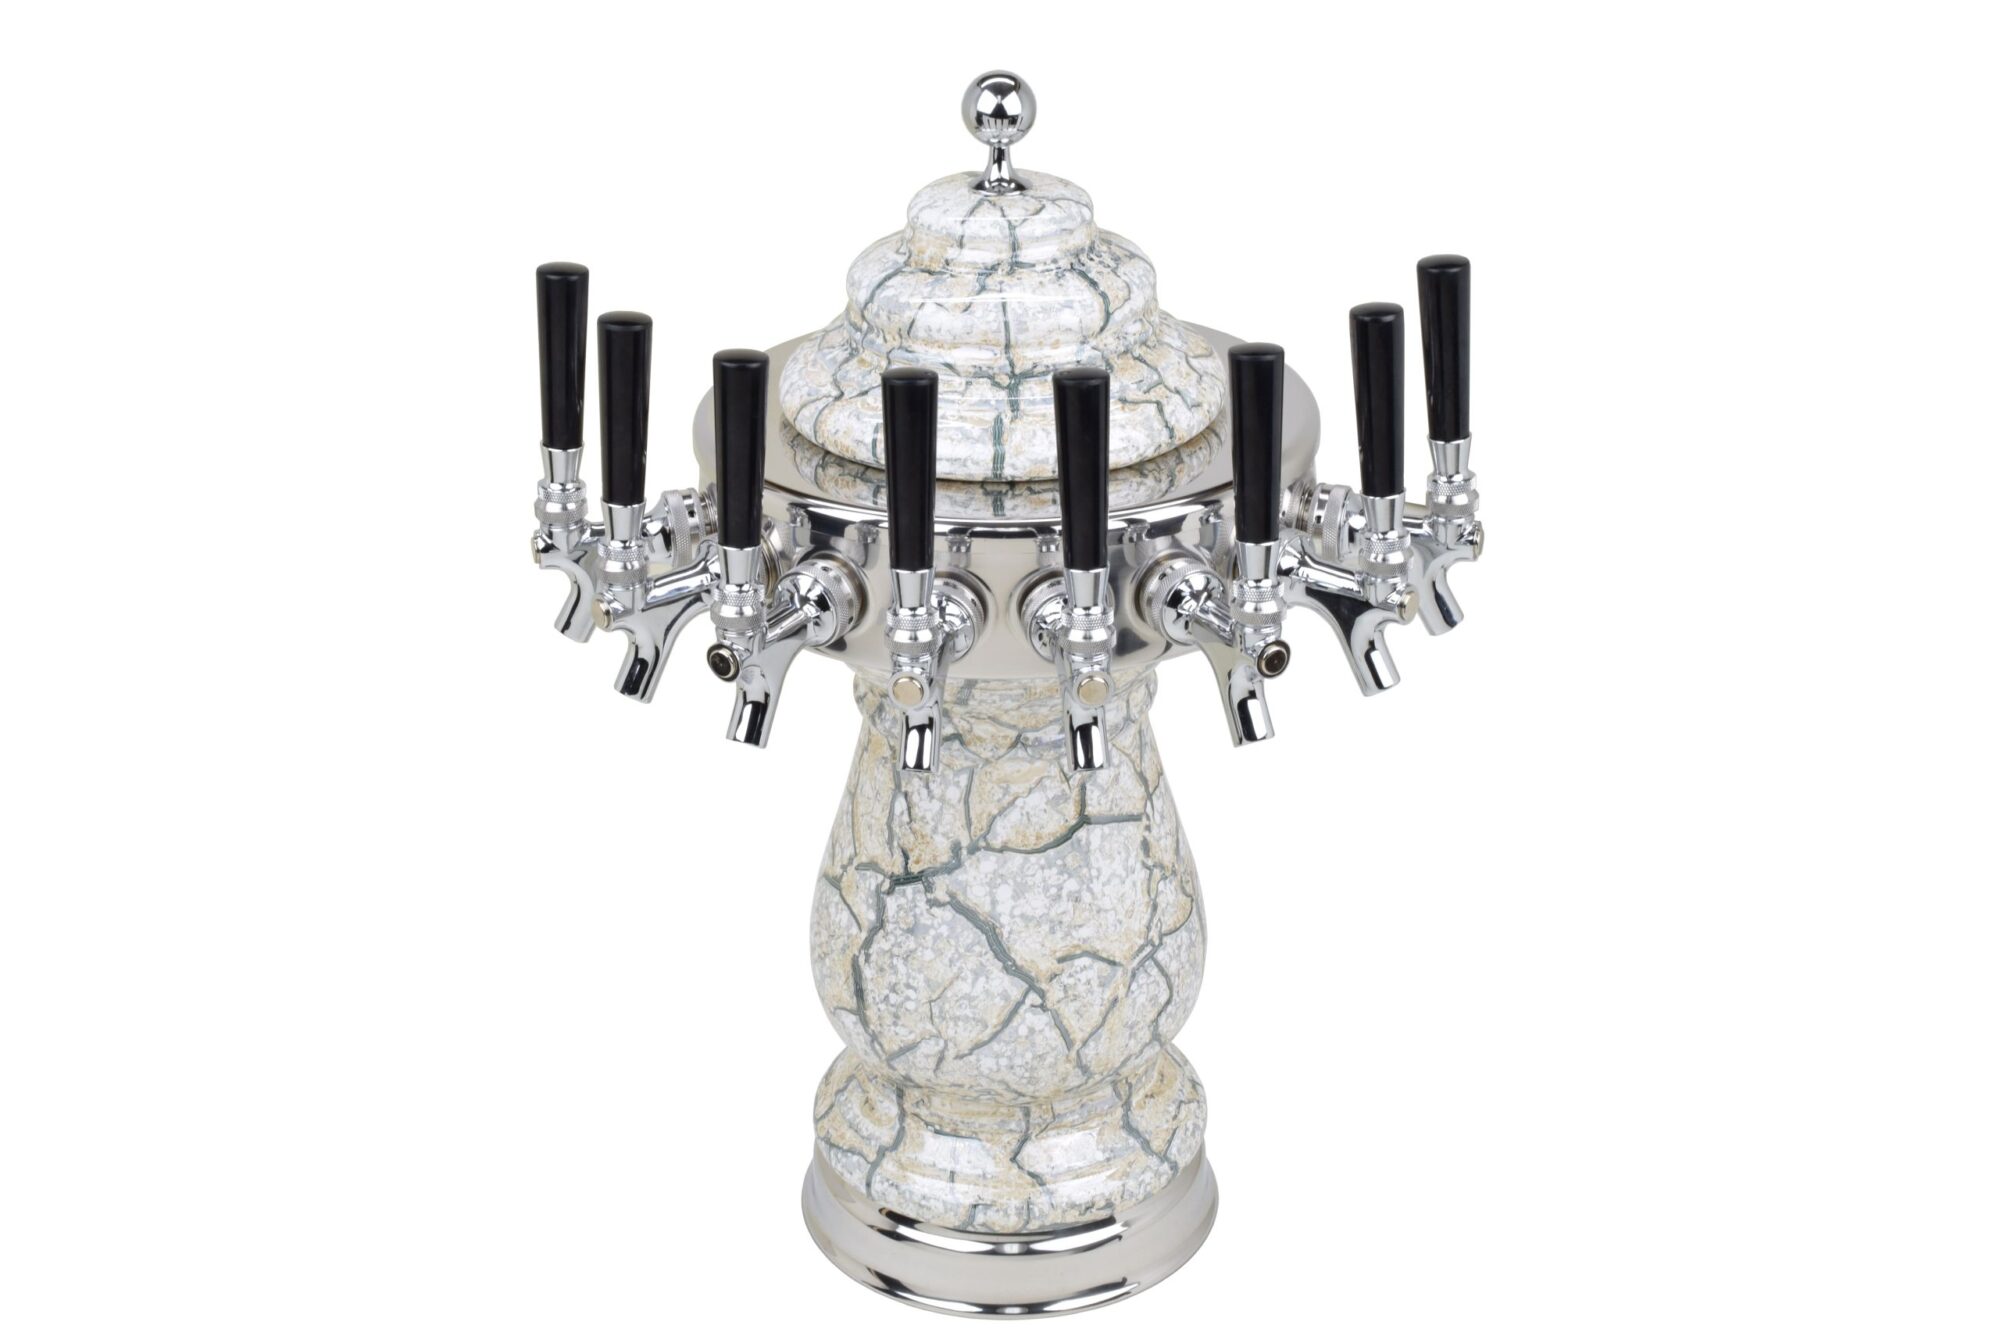 884C-8BeigeMarble Eight Faucet Ceramic Tower with Chrome Hardware and Faucets - Shown in Beige Marble